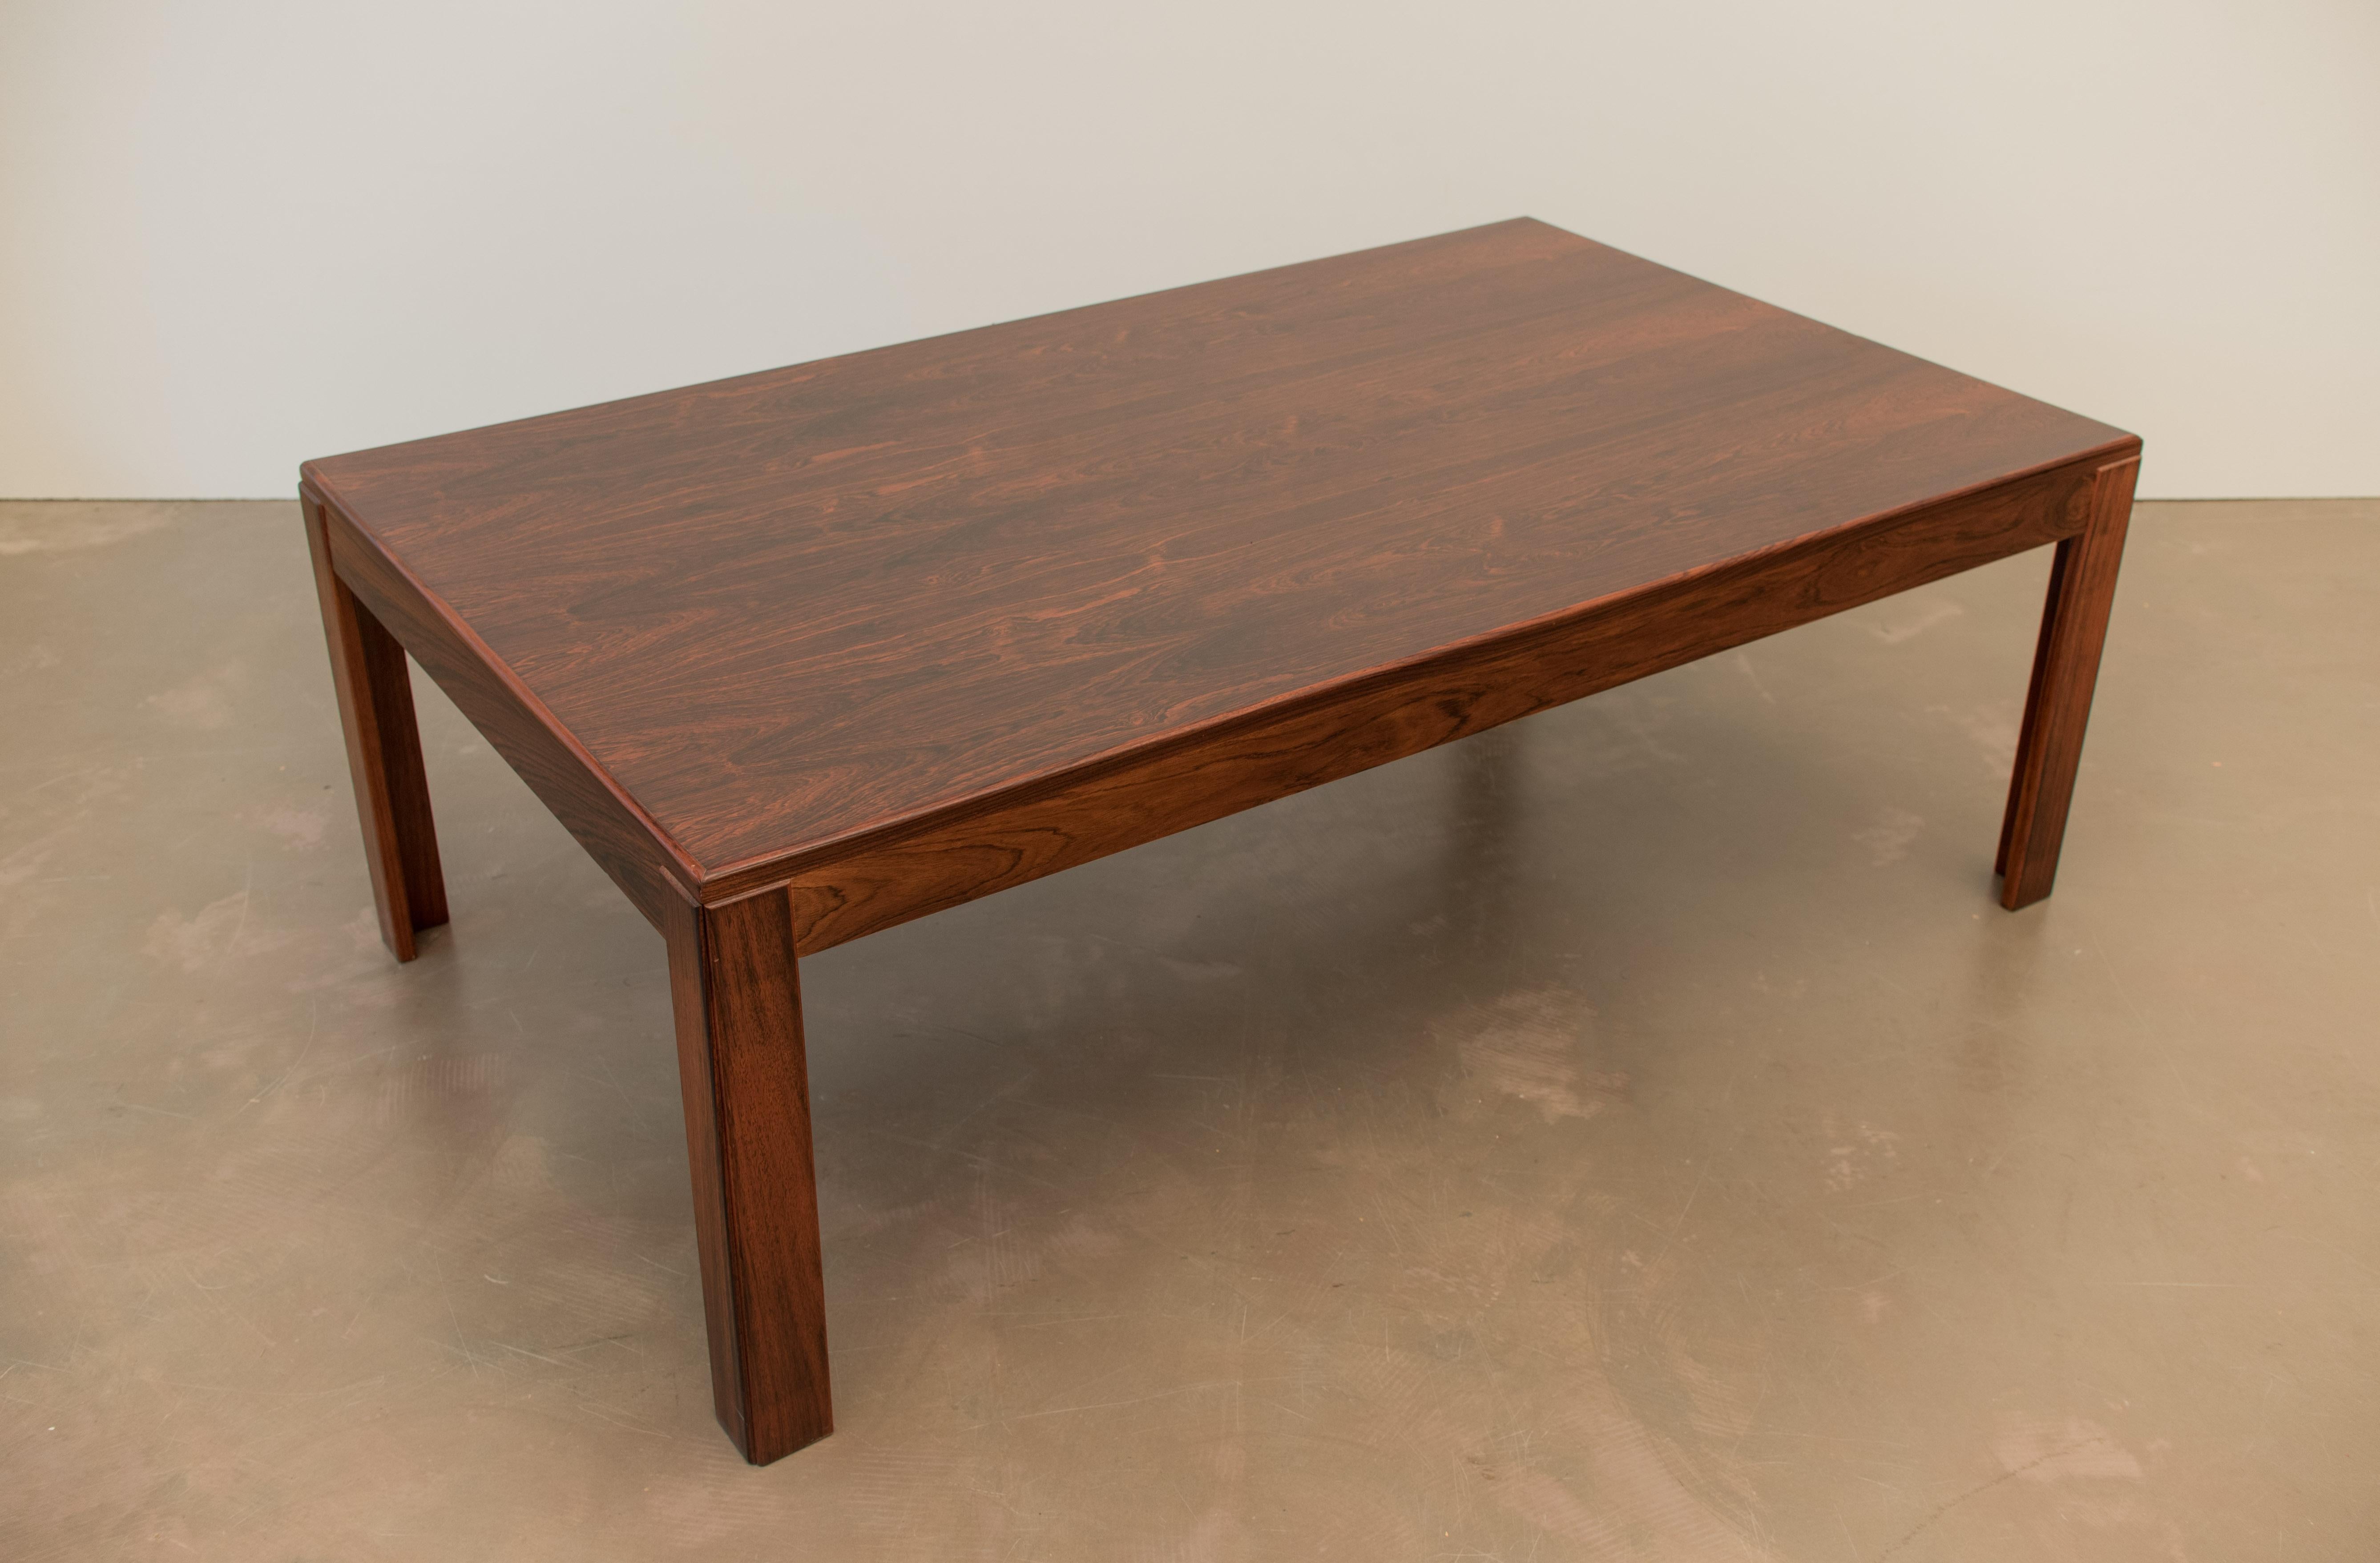 This Danish rosewood center table was produced during the 1960s.